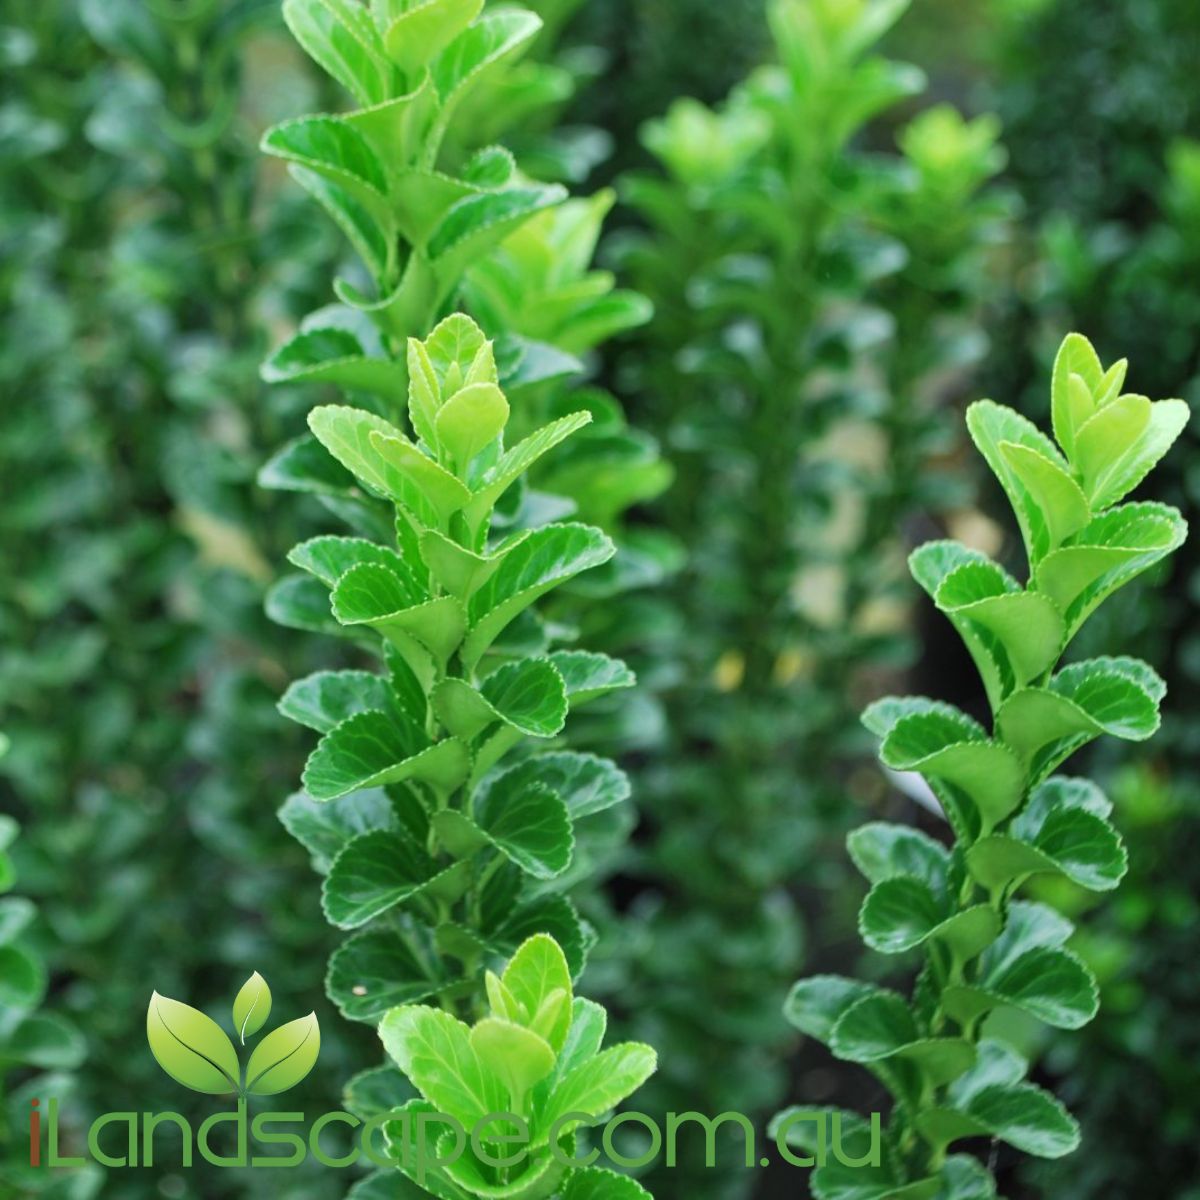 Euonomous Green Rocket is a beautiful dark green hedging plant with glossy oval shaped leaves that grows in Full sun & Part Shade  Grows Approx 1.5m tall x 1.0m wide and is perfect for gardens and or container planting 